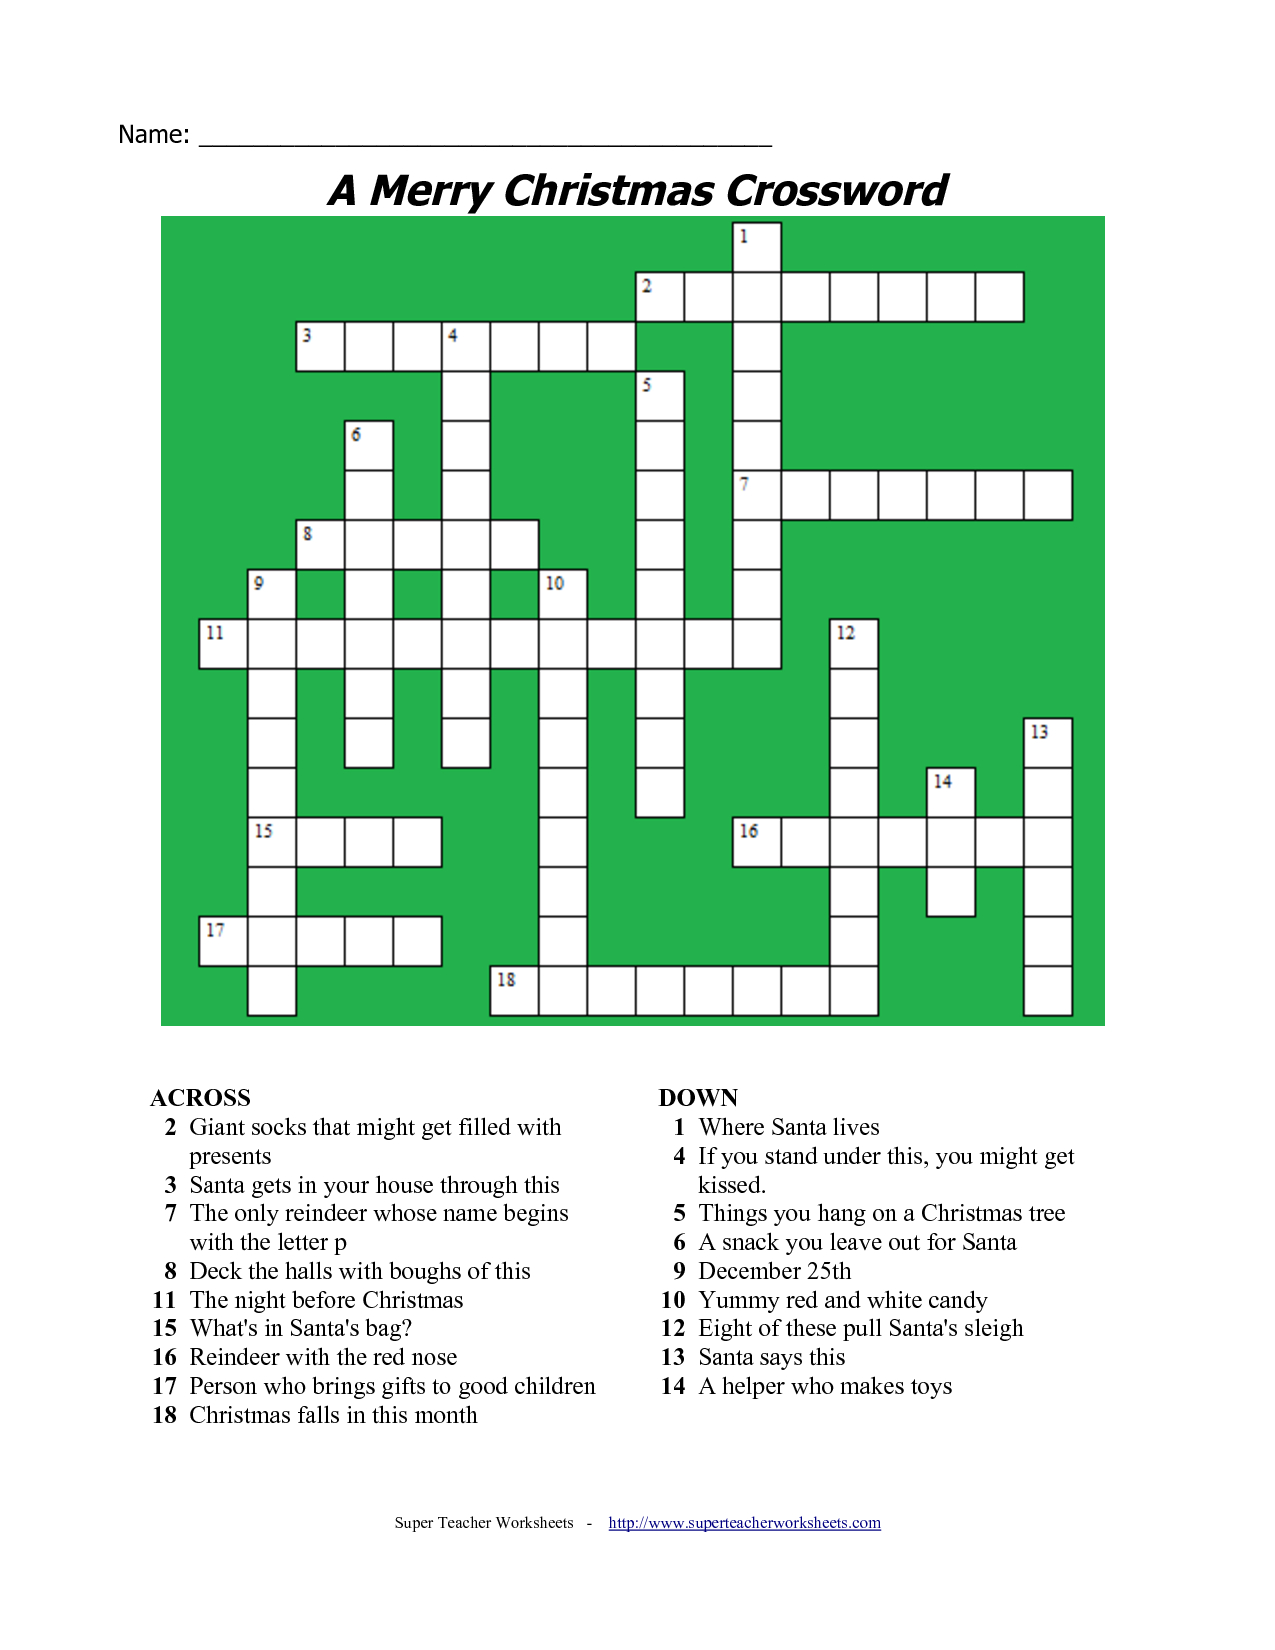 20 Fun Printable Christmas Crossword Puzzles | Kittybabylove - Printable Holiday Crossword Puzzles For Adults